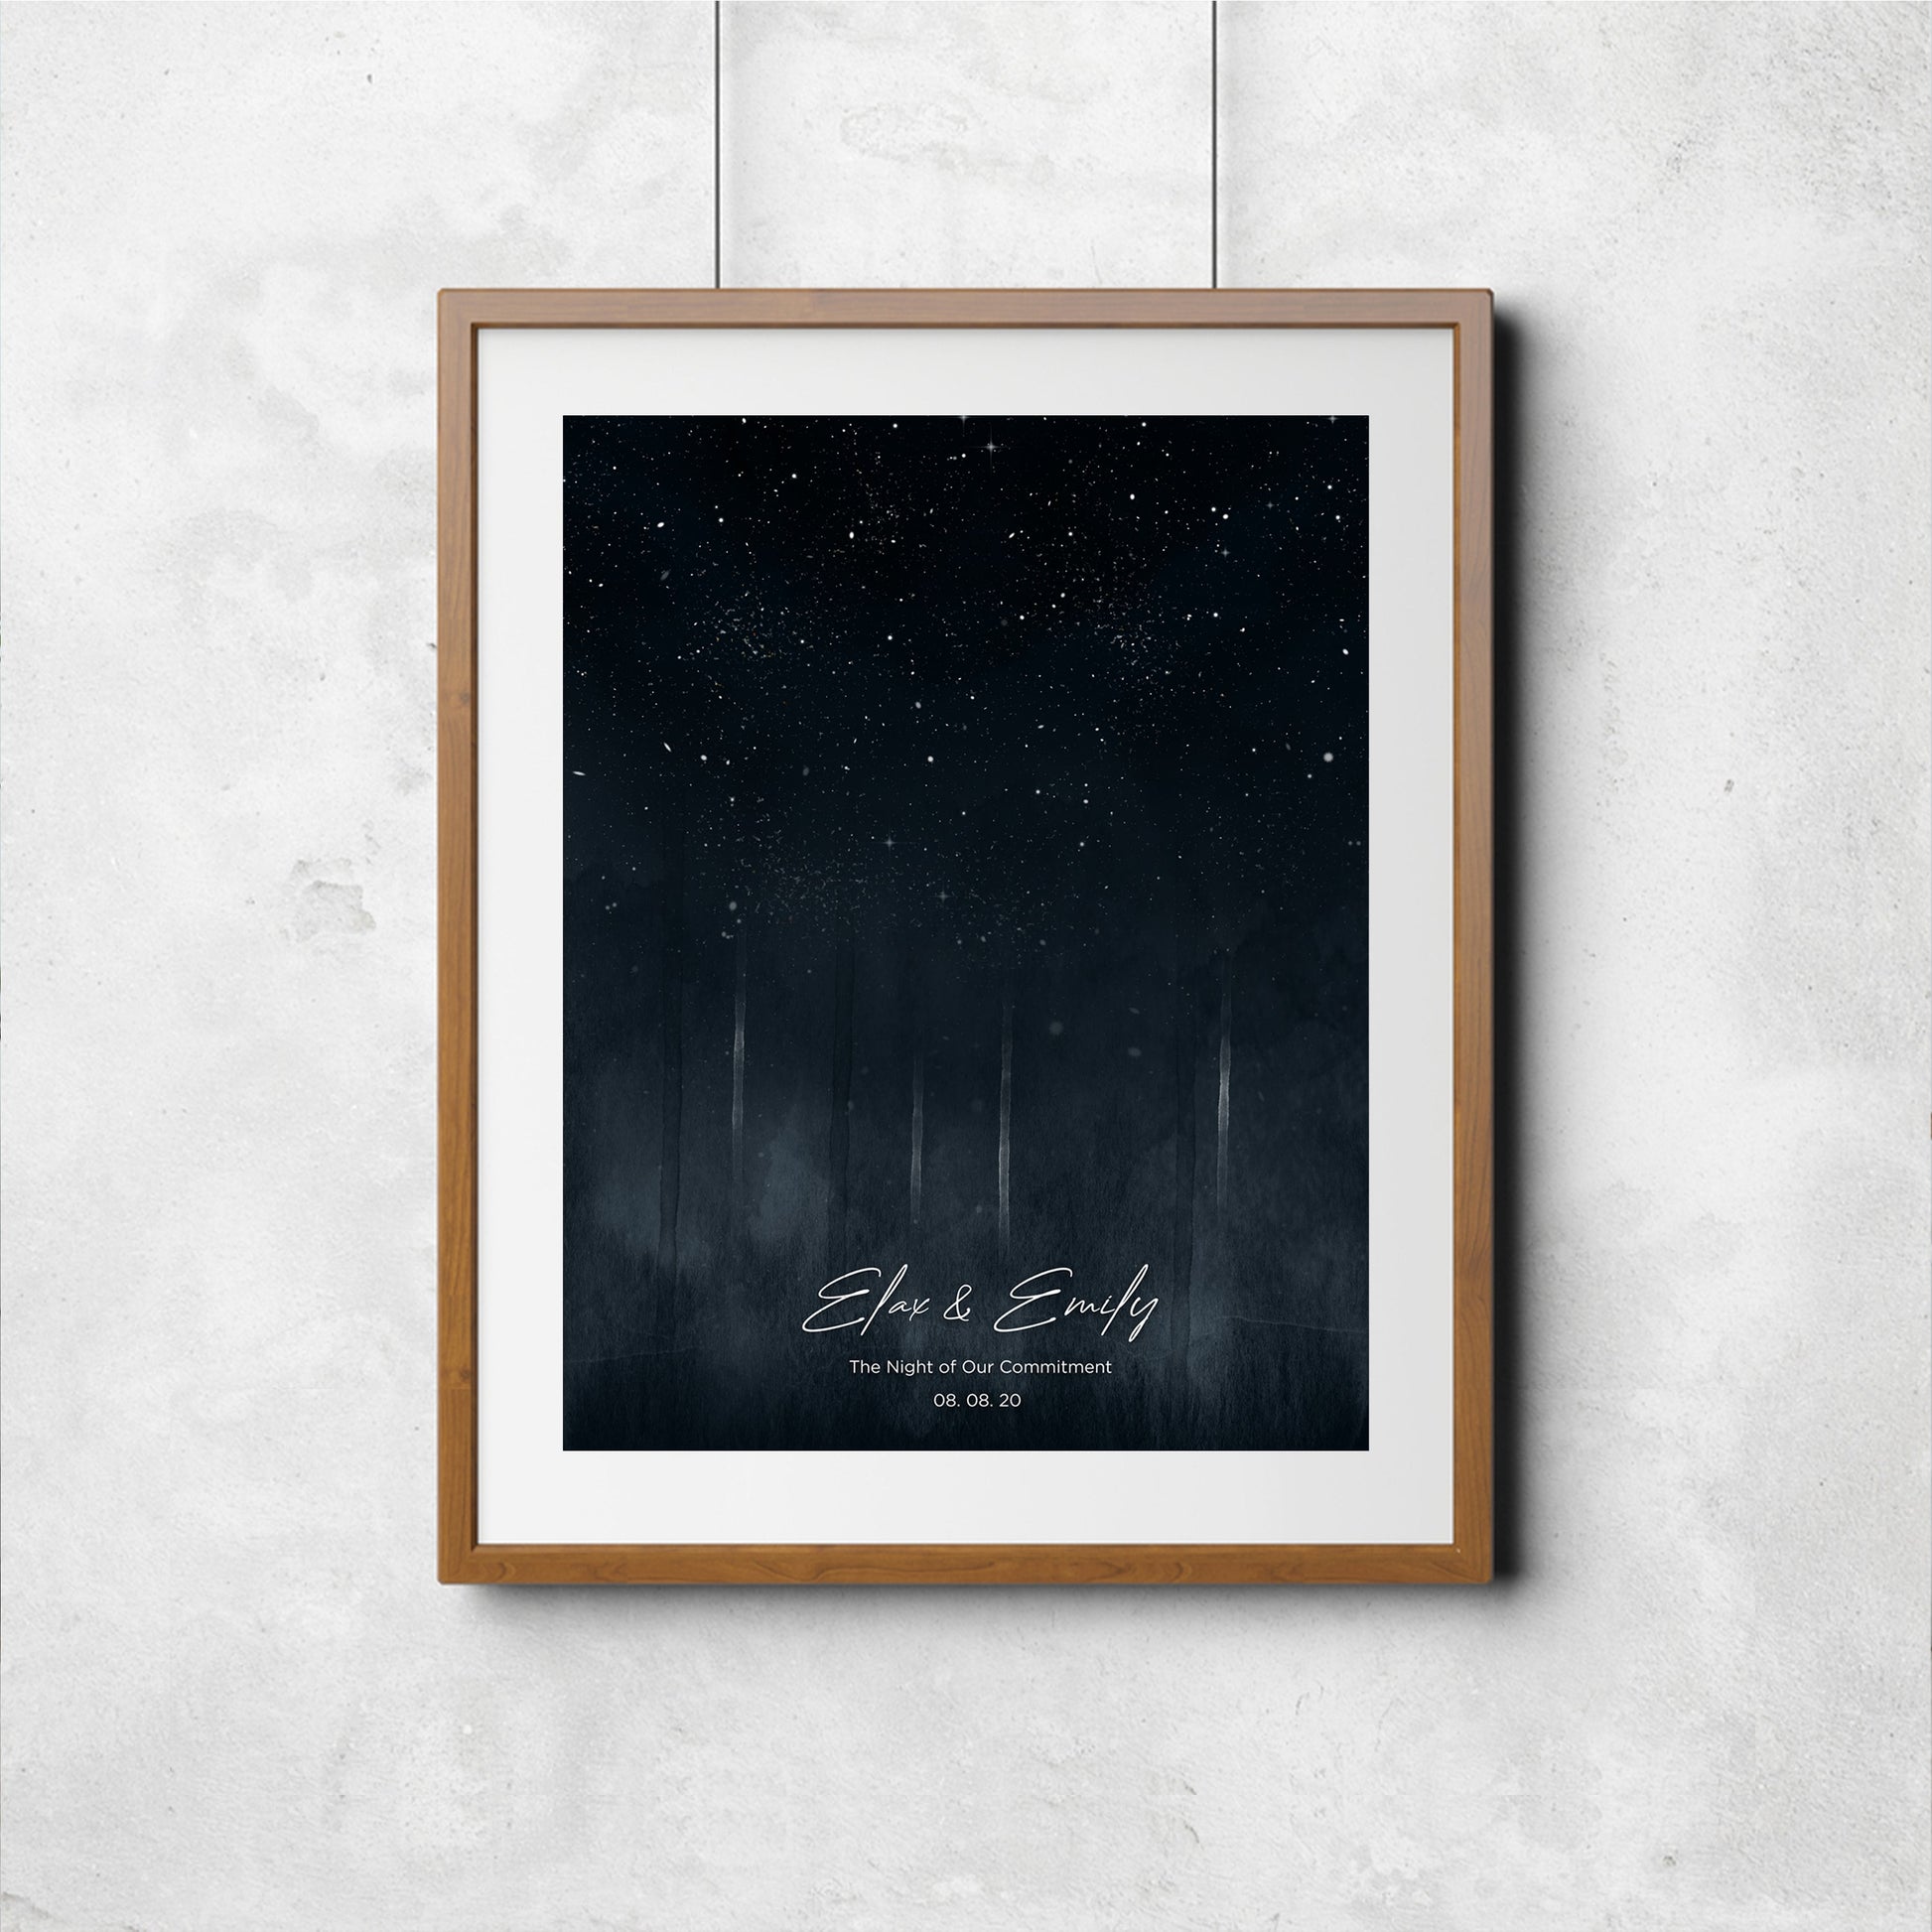 Personalized star map in frame on adorn wall: constellations of a cherished moment.